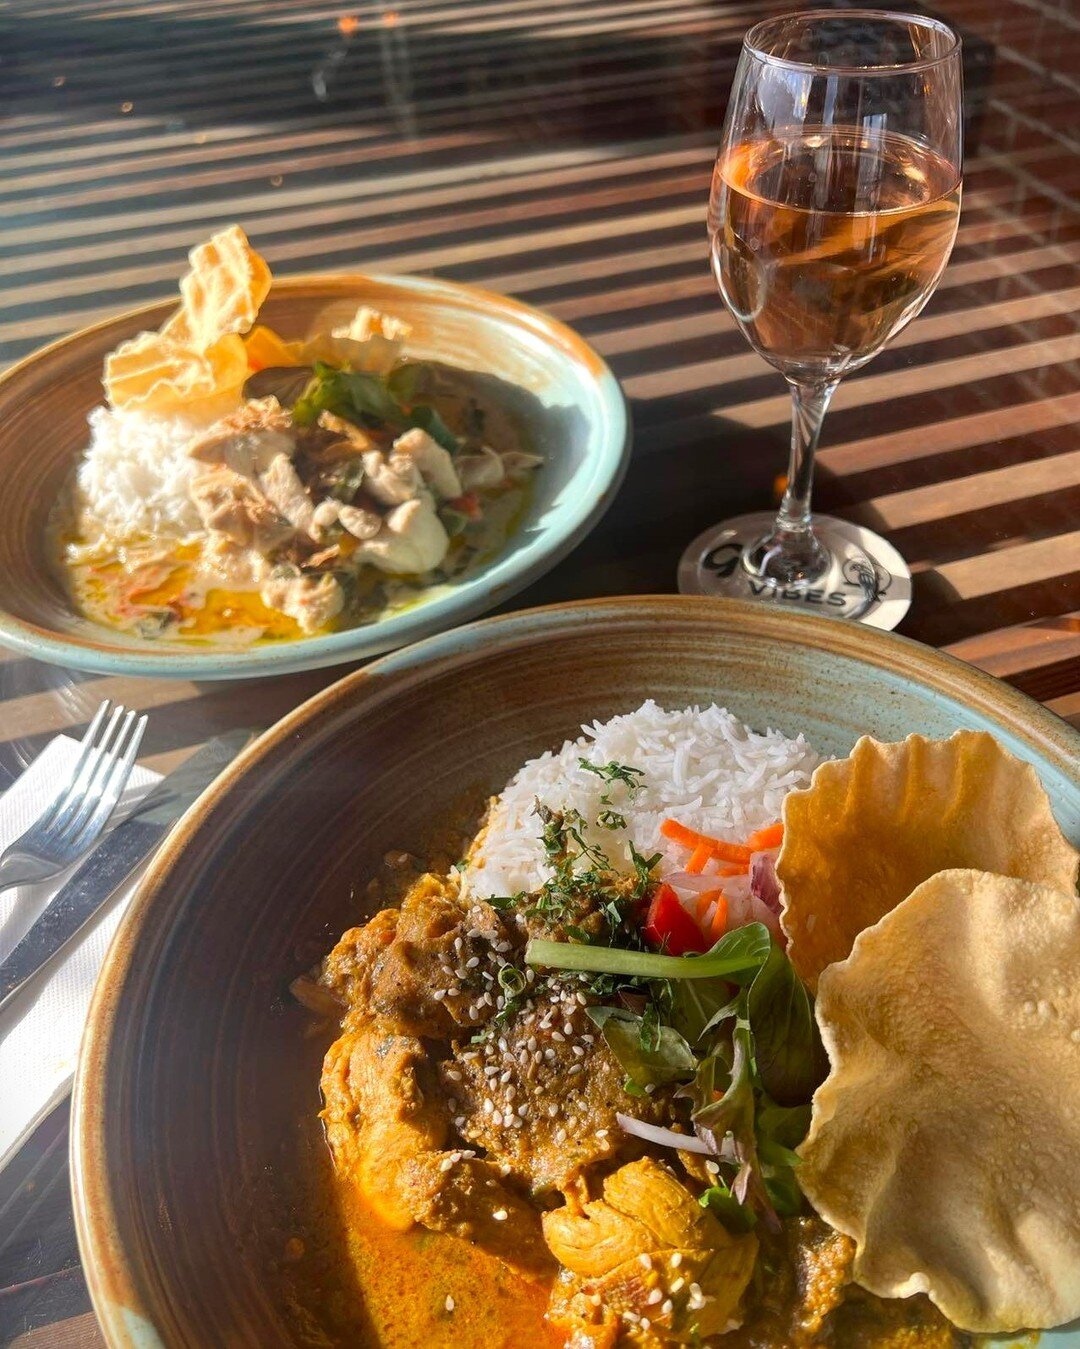 Kick back at Kellys Irish Pub with our $16 Tuesday curry special! 🍀

𝐓𝐨𝐧𝐢𝐠𝐡𝐭'𝐬 𝐟𝐥𝐚𝐯𝐨𝐮𝐫𝐬 𝐢𝐧𝐜𝐥𝐮𝐝𝐞:
- Creamy Thai green chicken curry
- Beef aloo gohst curry 
- Traditional Bangladeshi curry

Check out our full menu + book your s